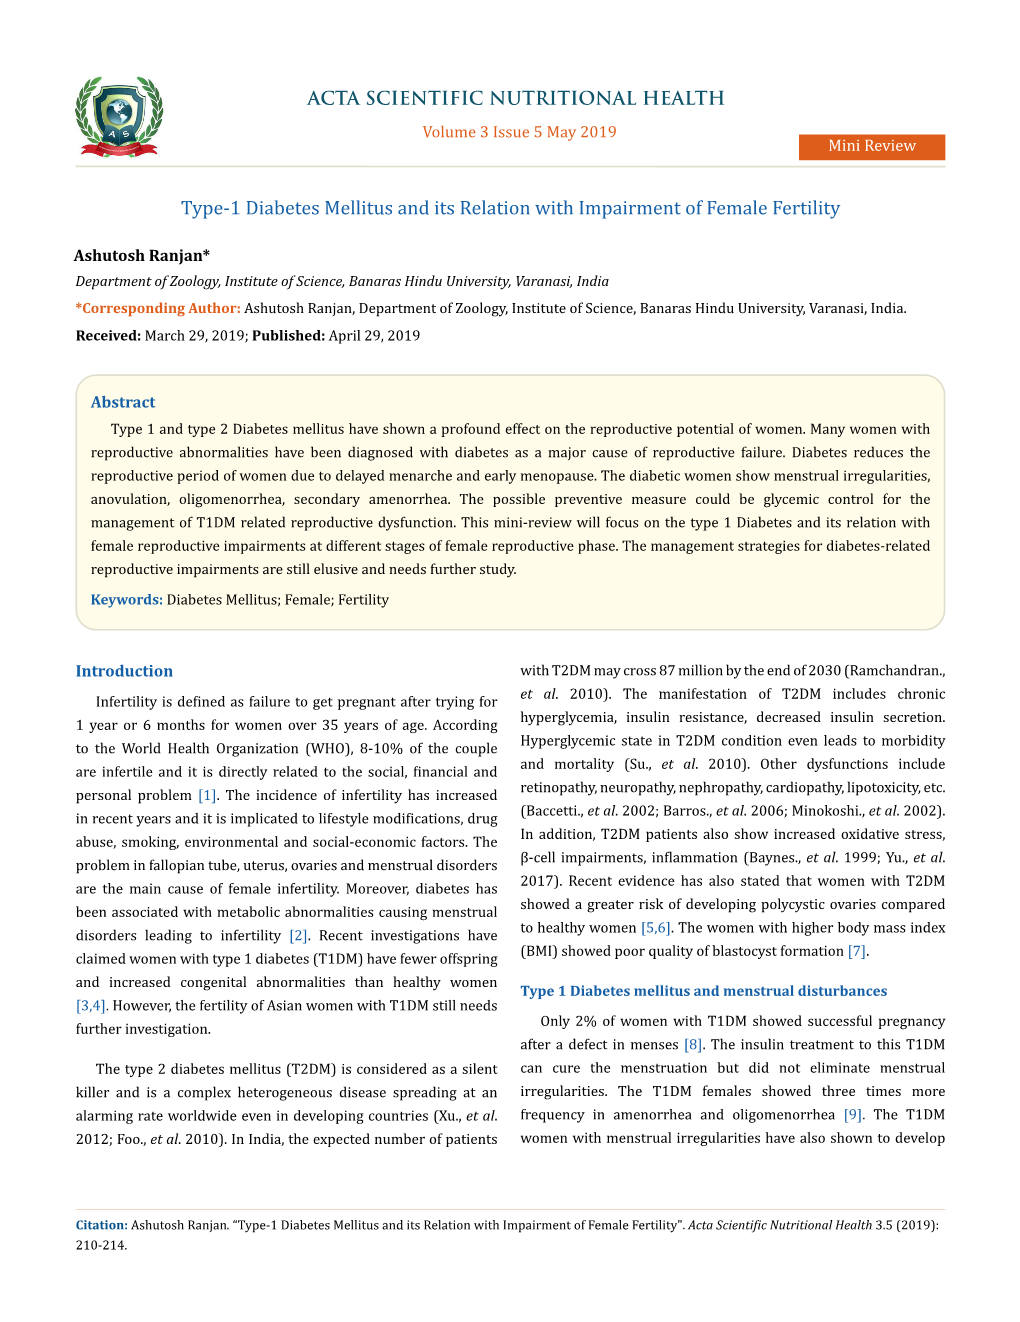 Type-1 Diabetes Mellitus and Its Relation with Impairment of Female Fertility